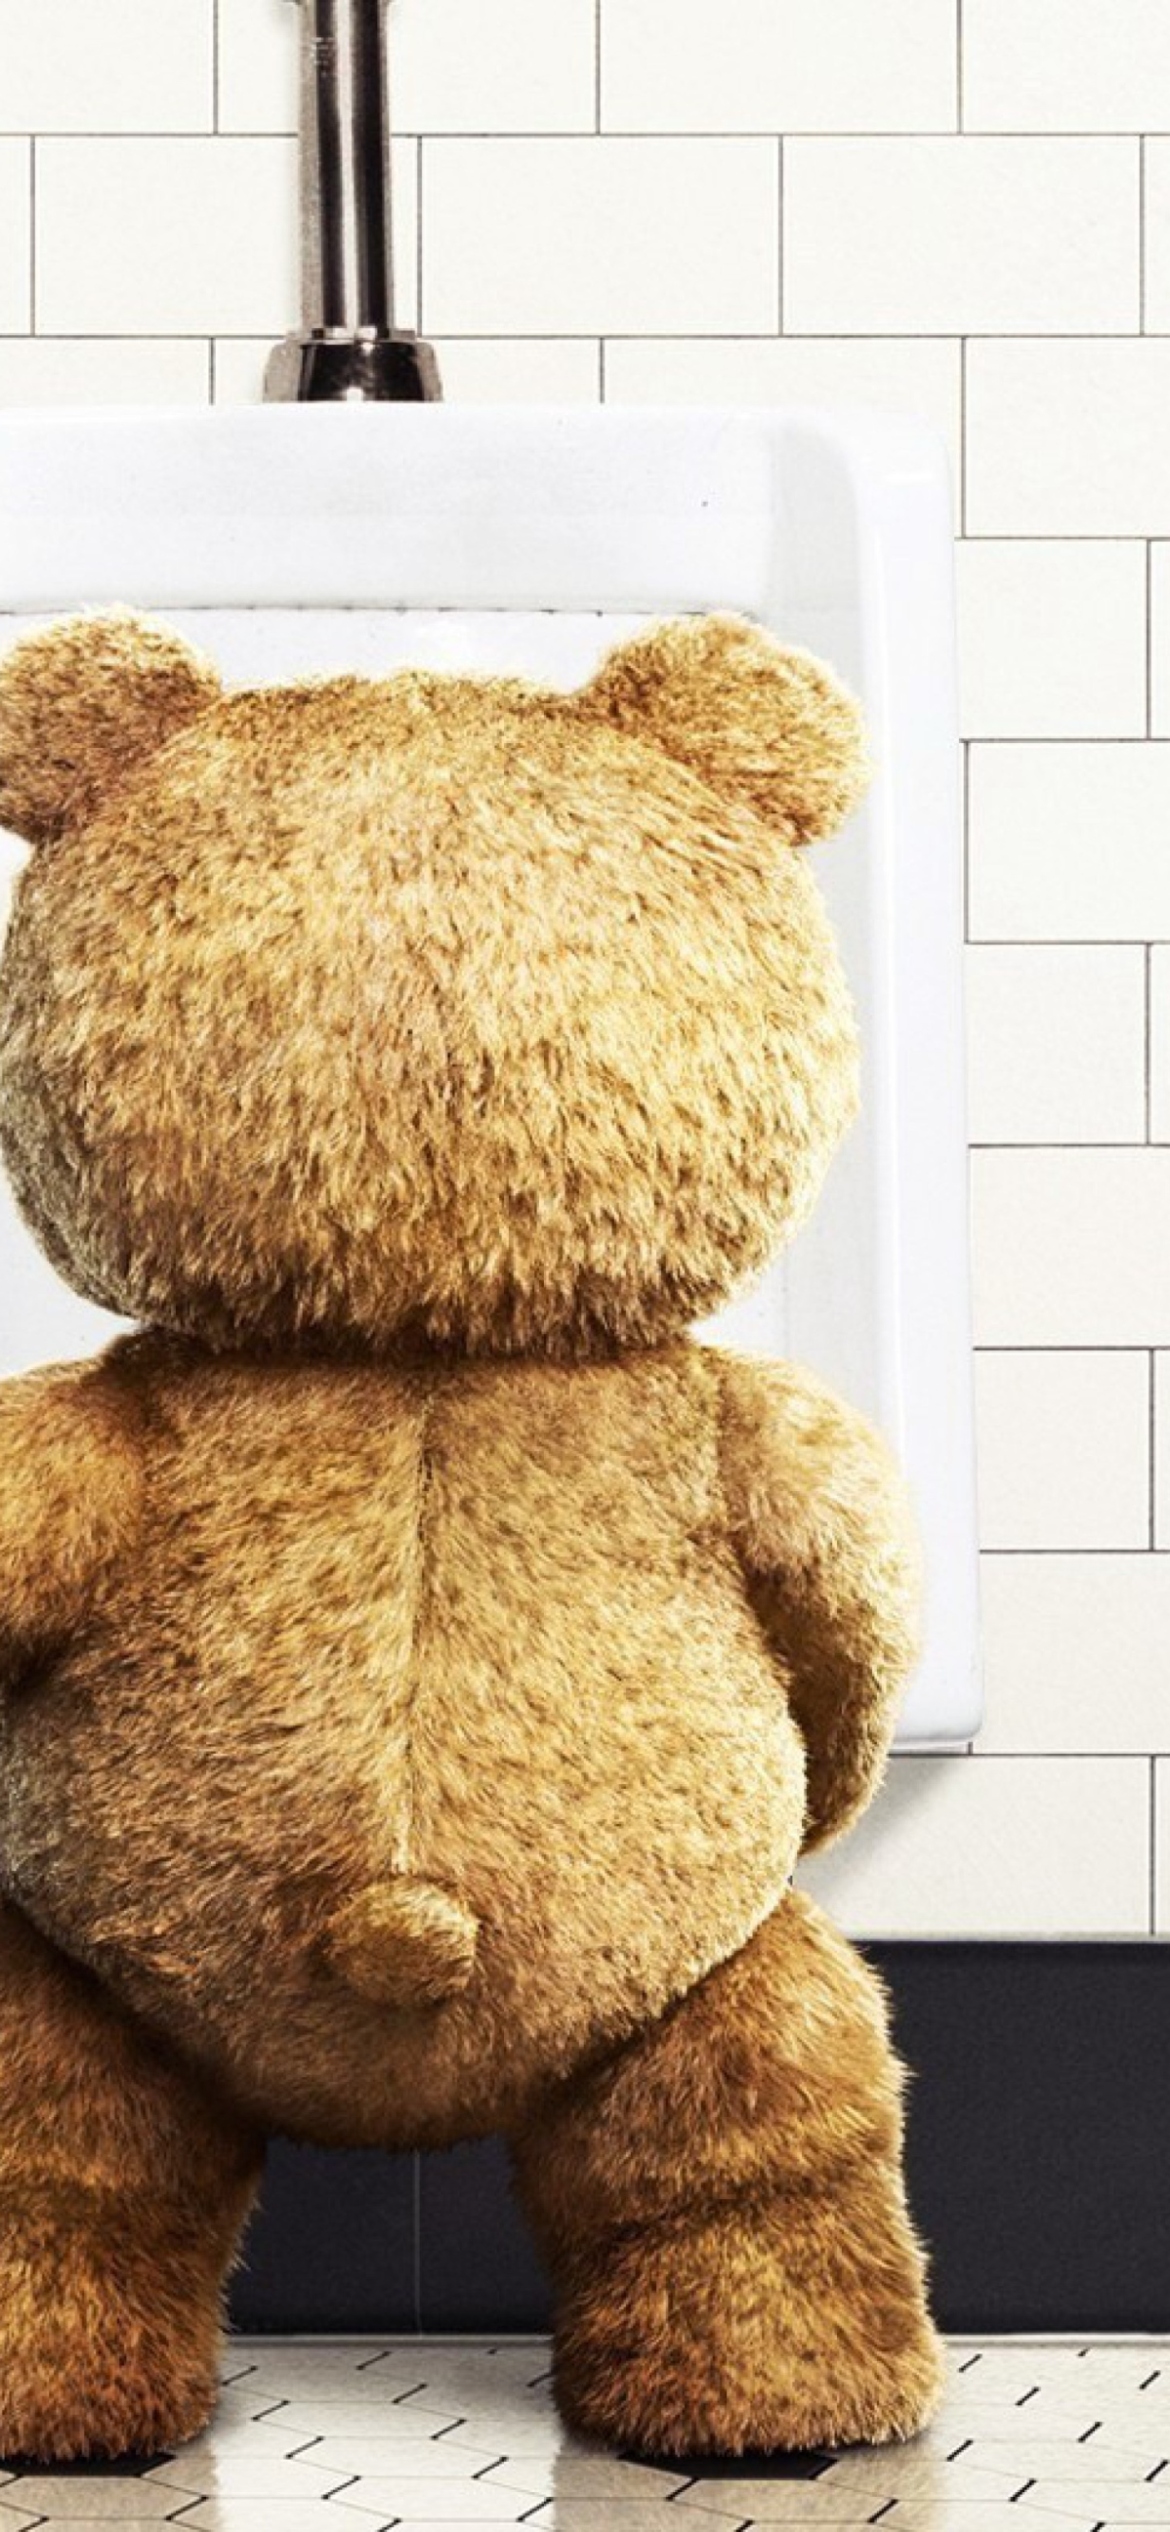 Ted Poster wallpaper 1170x2532